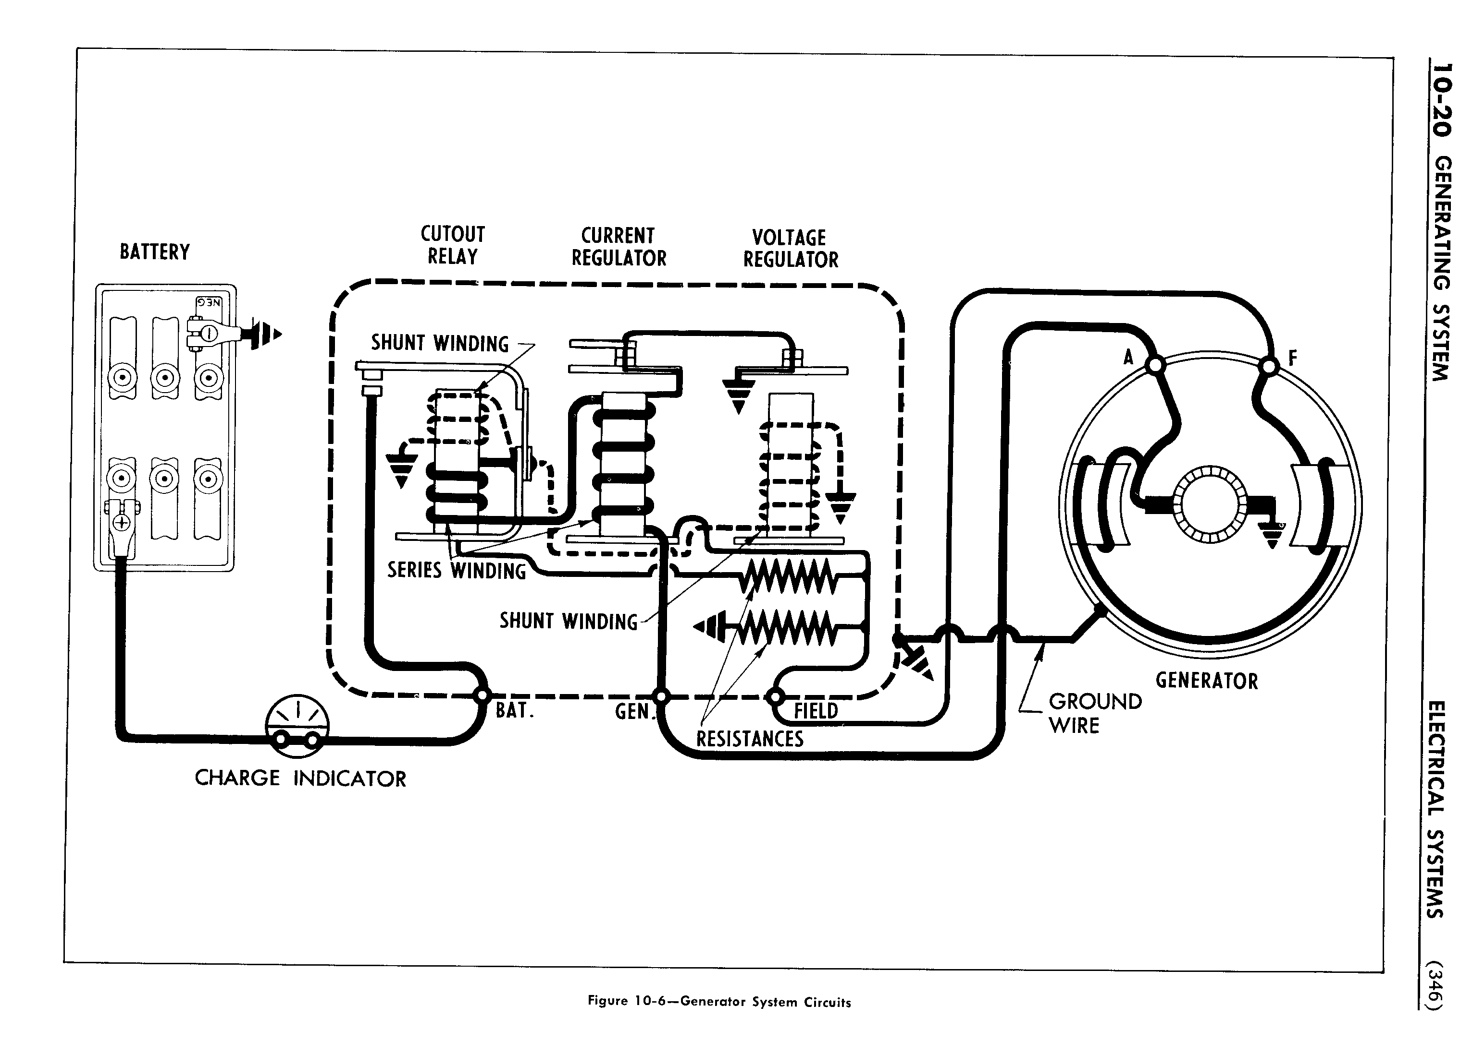 n_11 1956 Buick Shop Manual - Electrical Systems-020-020.jpg